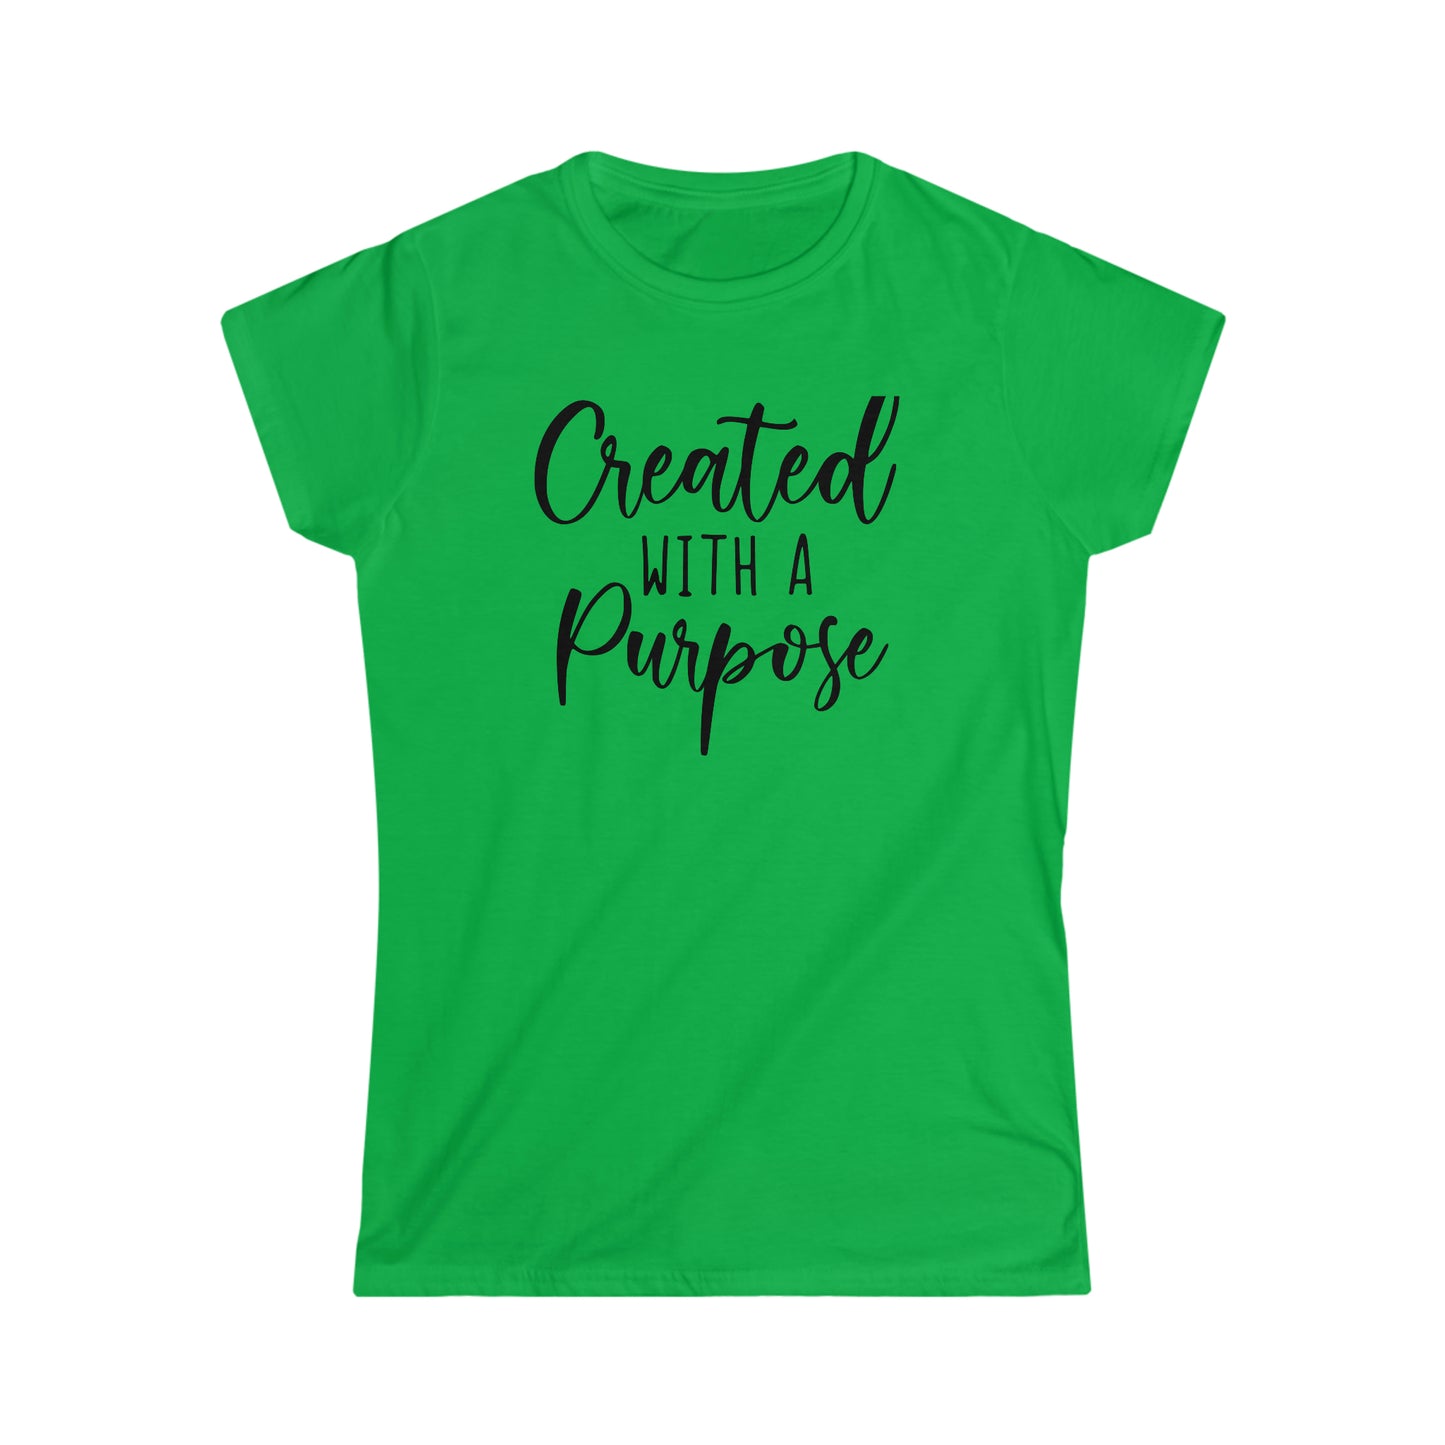 Christian Apparel (Created With a Purpose)